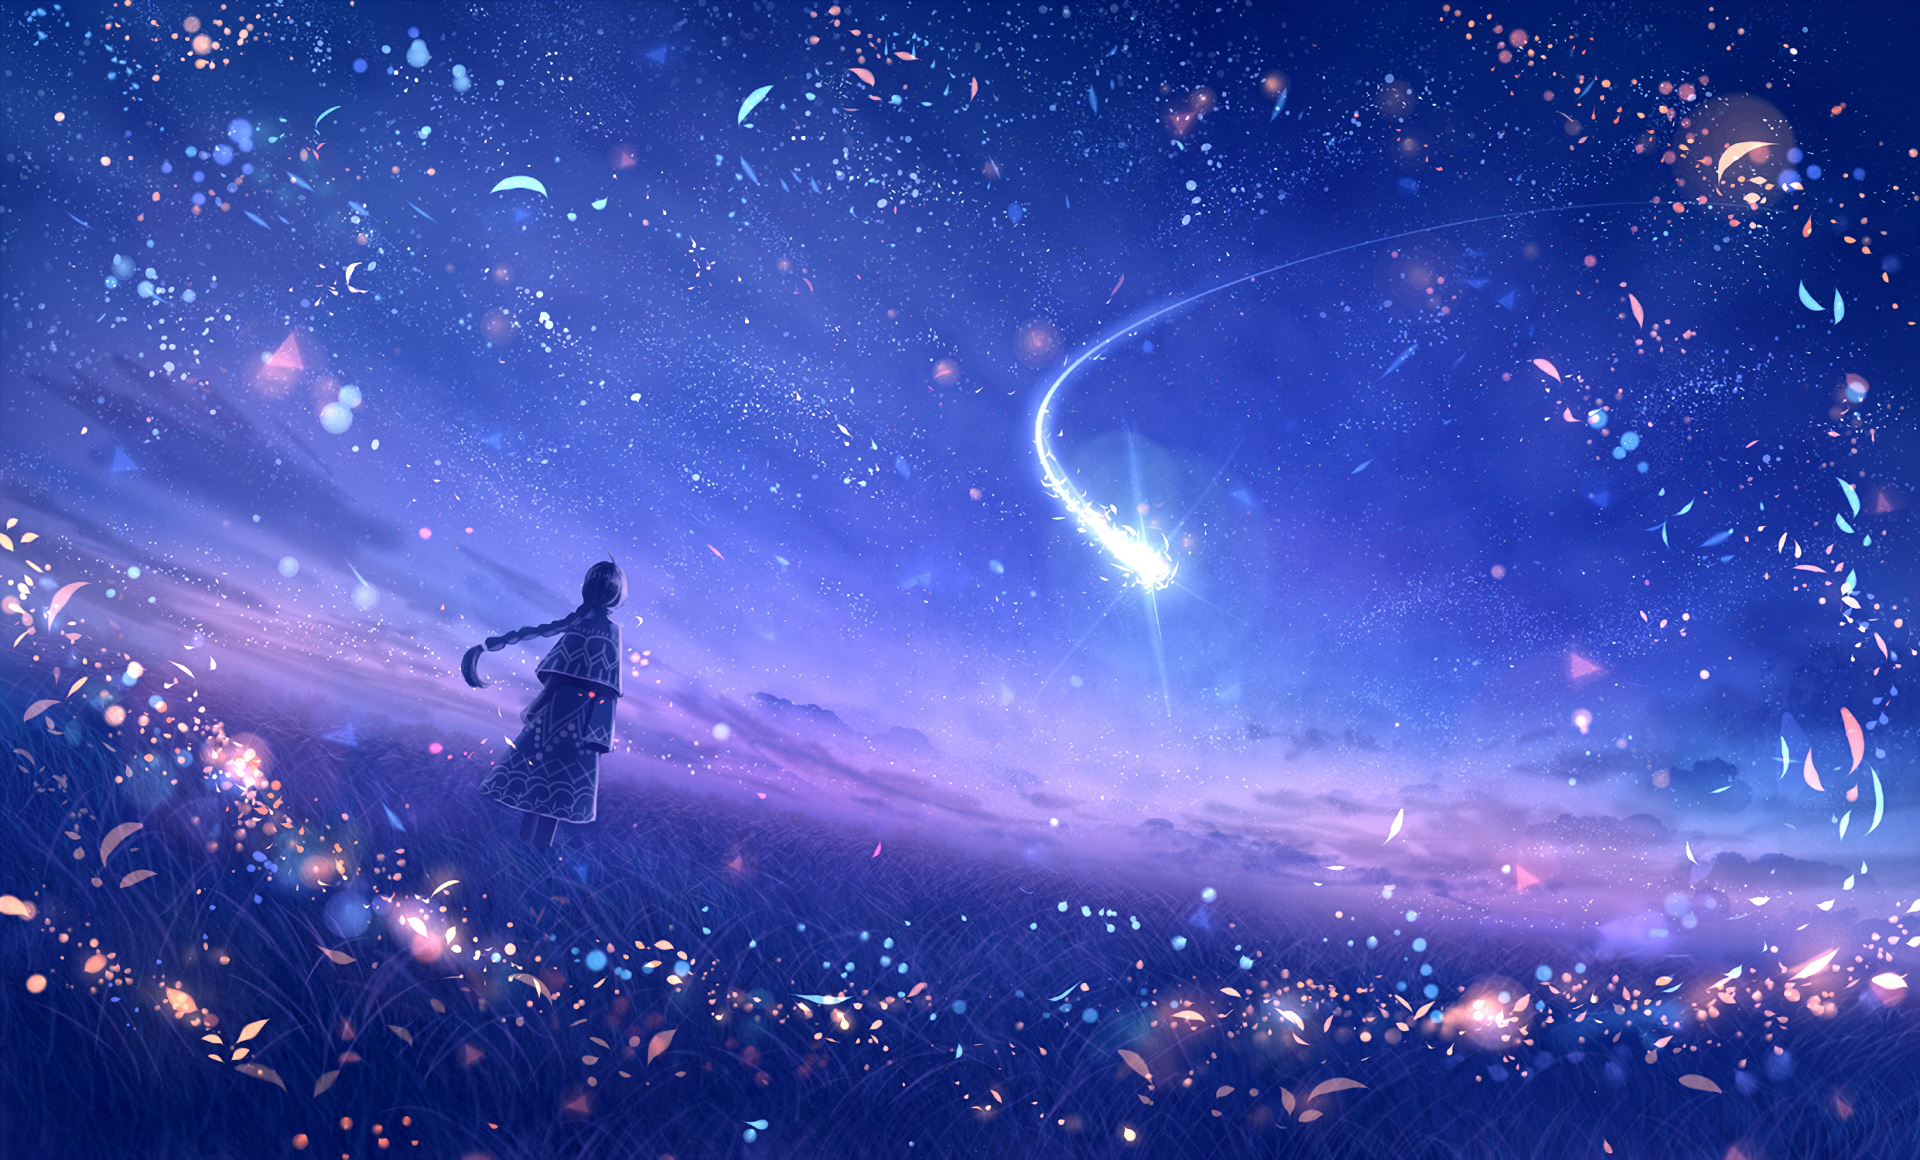 Wallpaper ID: 578352 / astronomy, digital composite, constellation, anime,  star - space, Pixiv Fantasia, cold temperature, comet, beauty in nature,  katana, science, frigidity free download